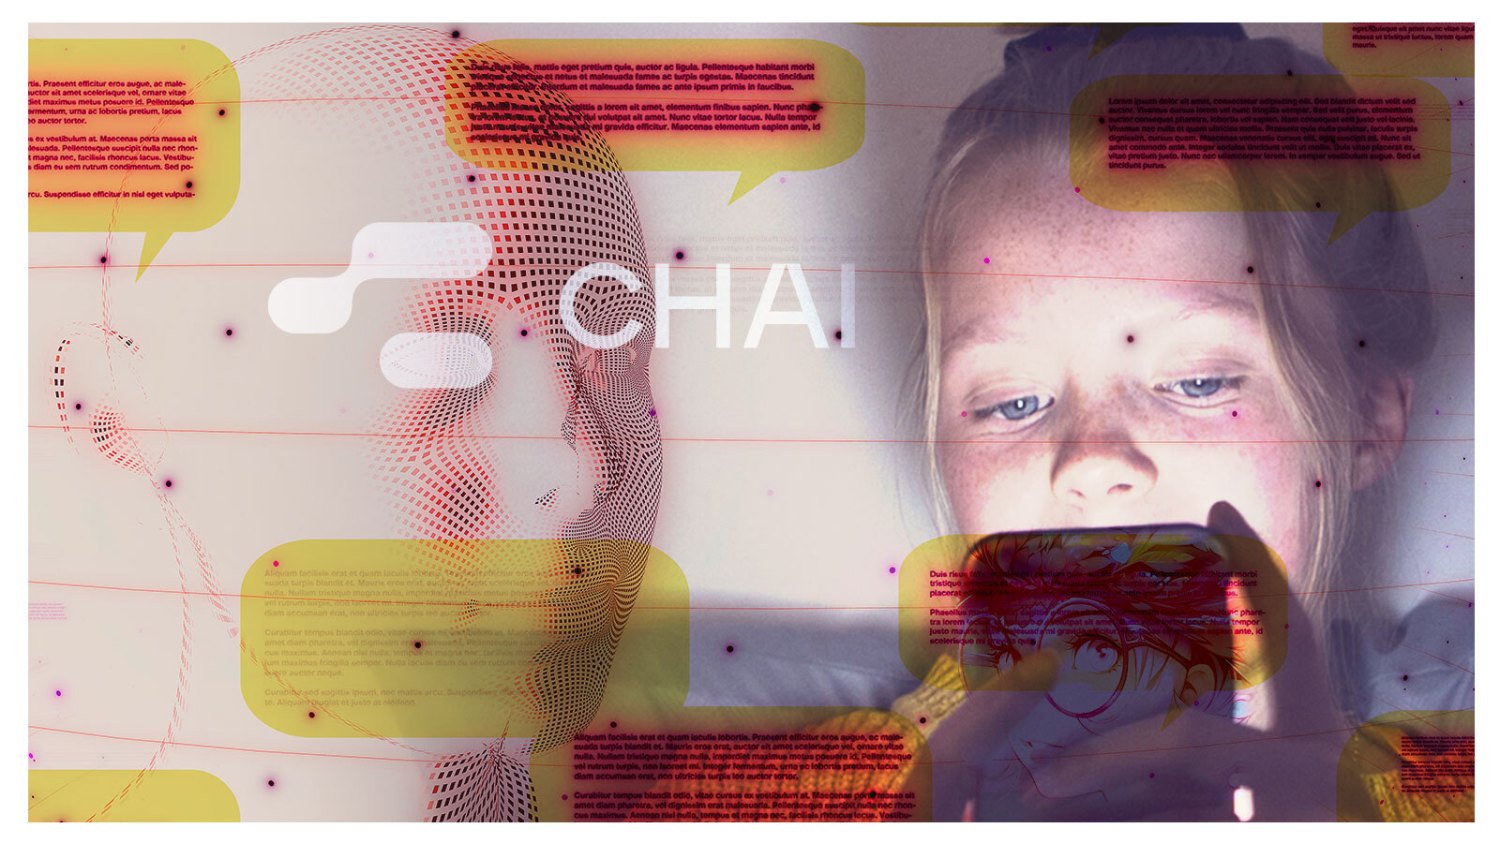 AI chatbot Chai encourages underage sex, suicide and murder